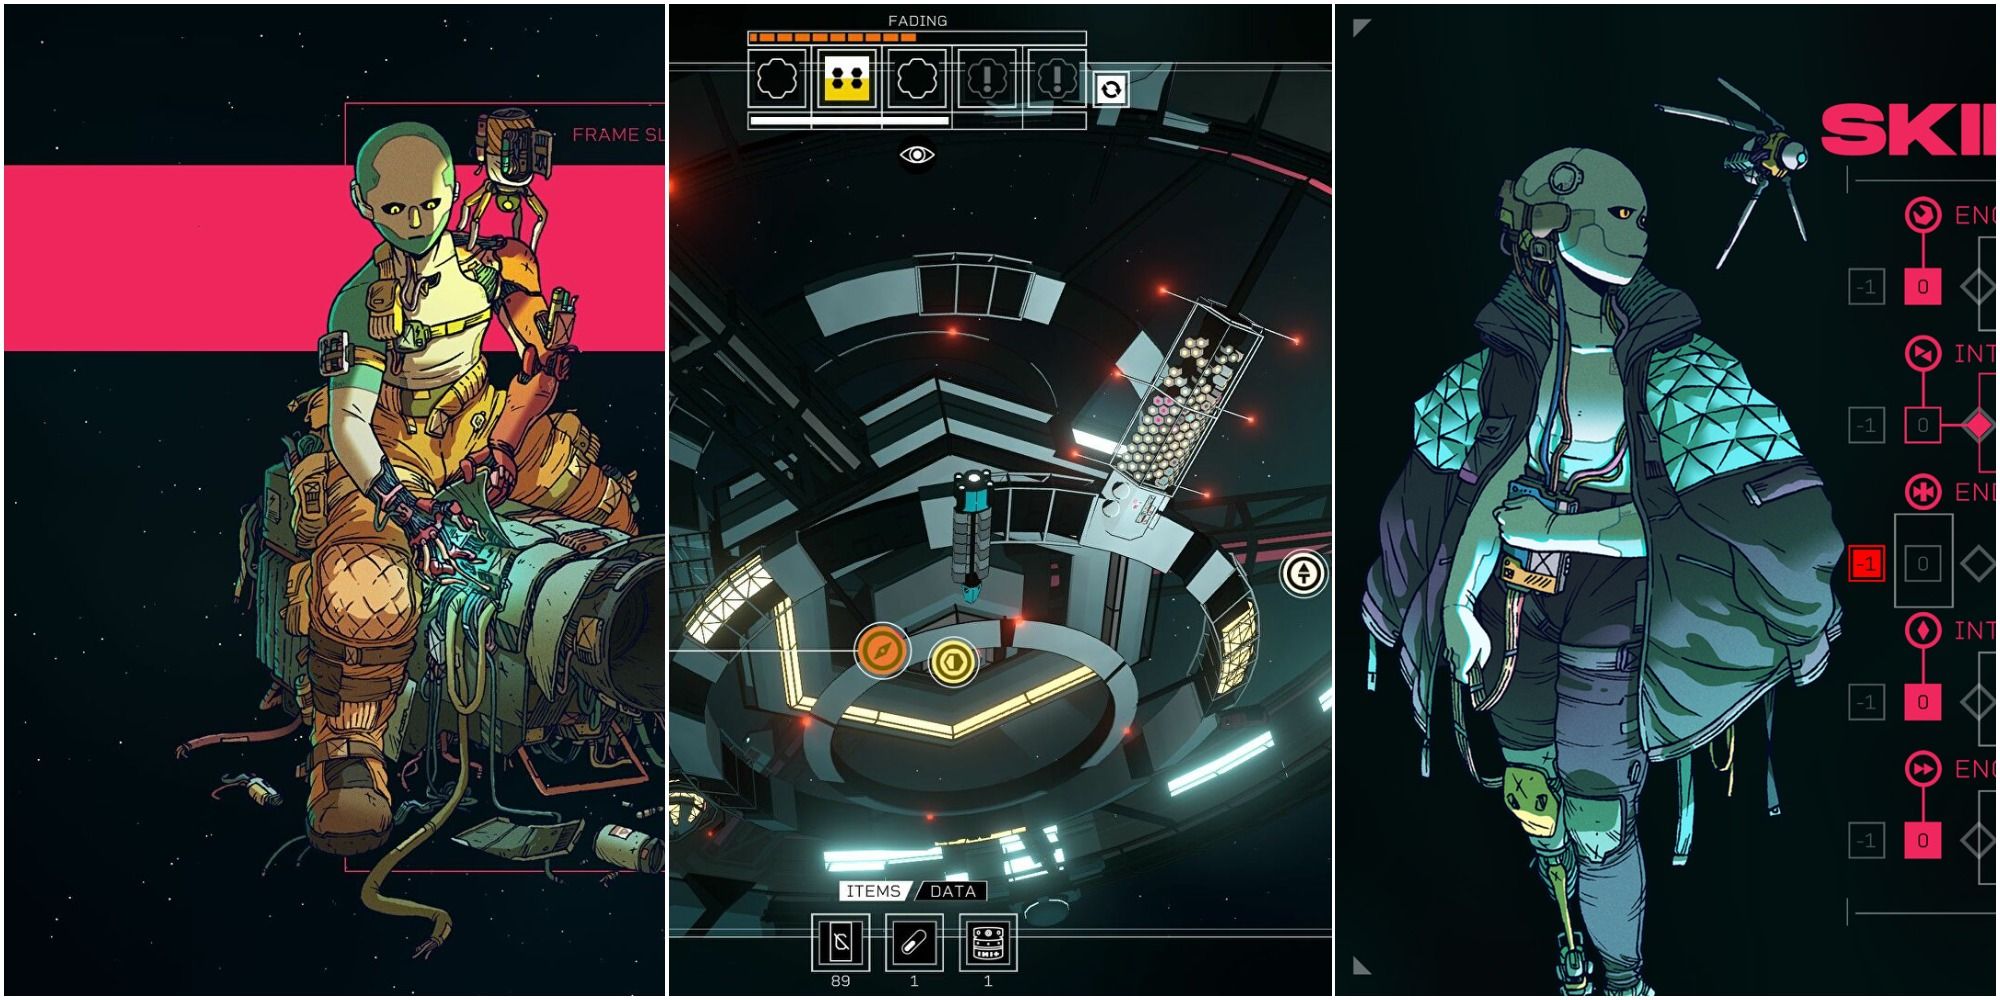 two robotic figures are shown depicting two of the three classes. they bookmark the hub which is the central portion of the space station known as the eye in citizen sleeper